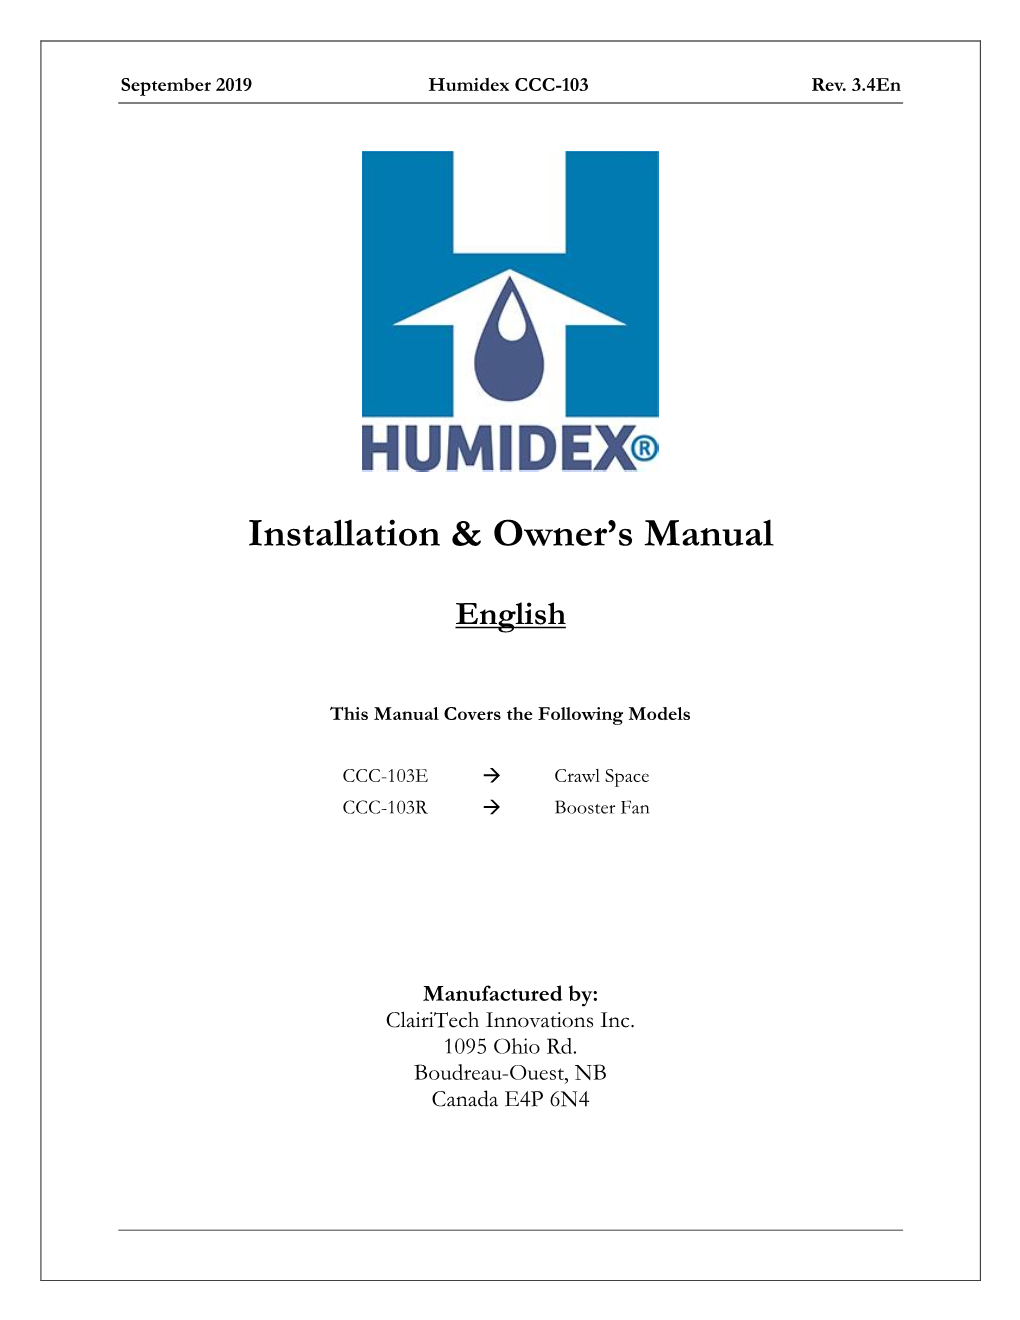 Installation & Owner's Manual